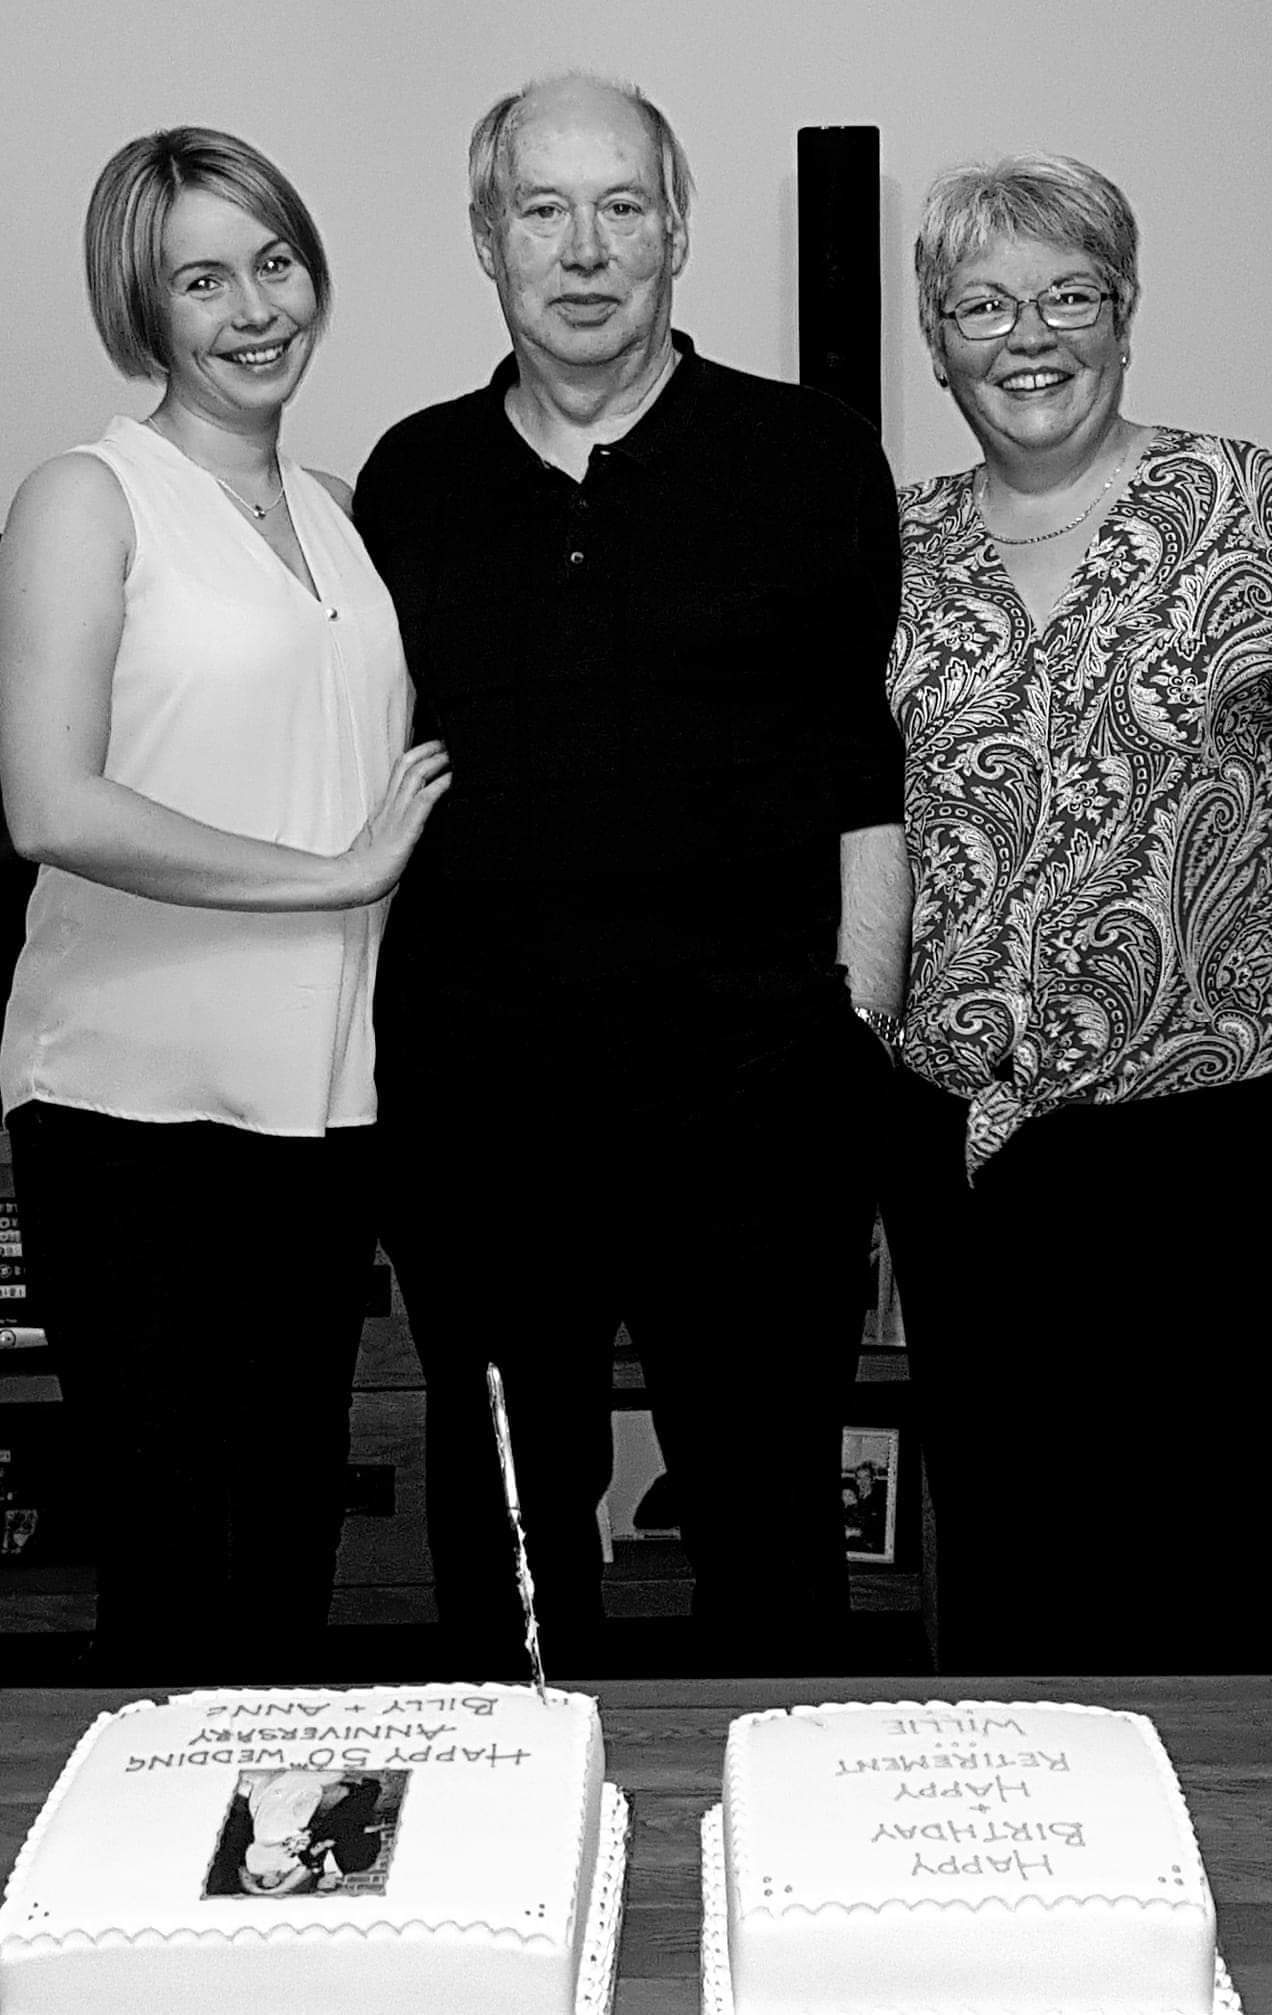 Mr Macfarlane with his daughter Carolyn (left) and wife Ann (right) on his 66th birthday in October 2018.